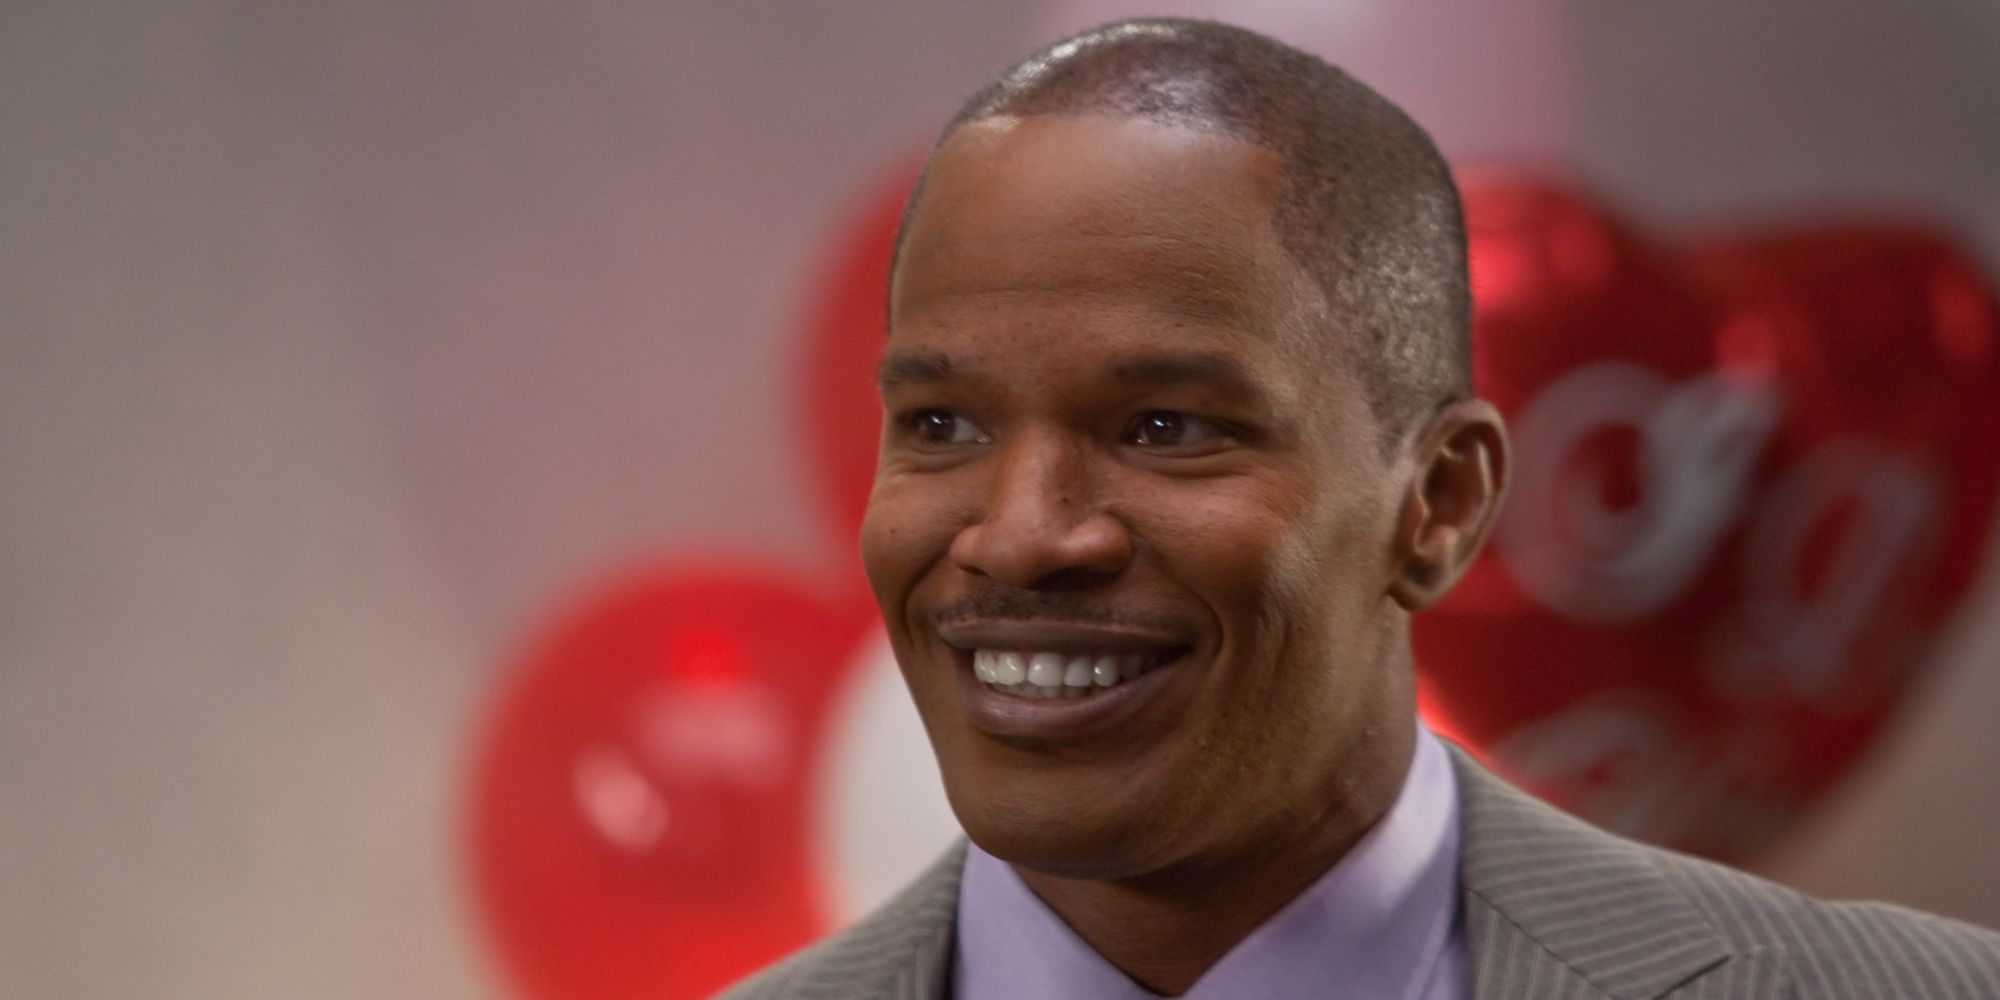 Jamie Foxx smiles awkwardly at a party in Valentine's Day